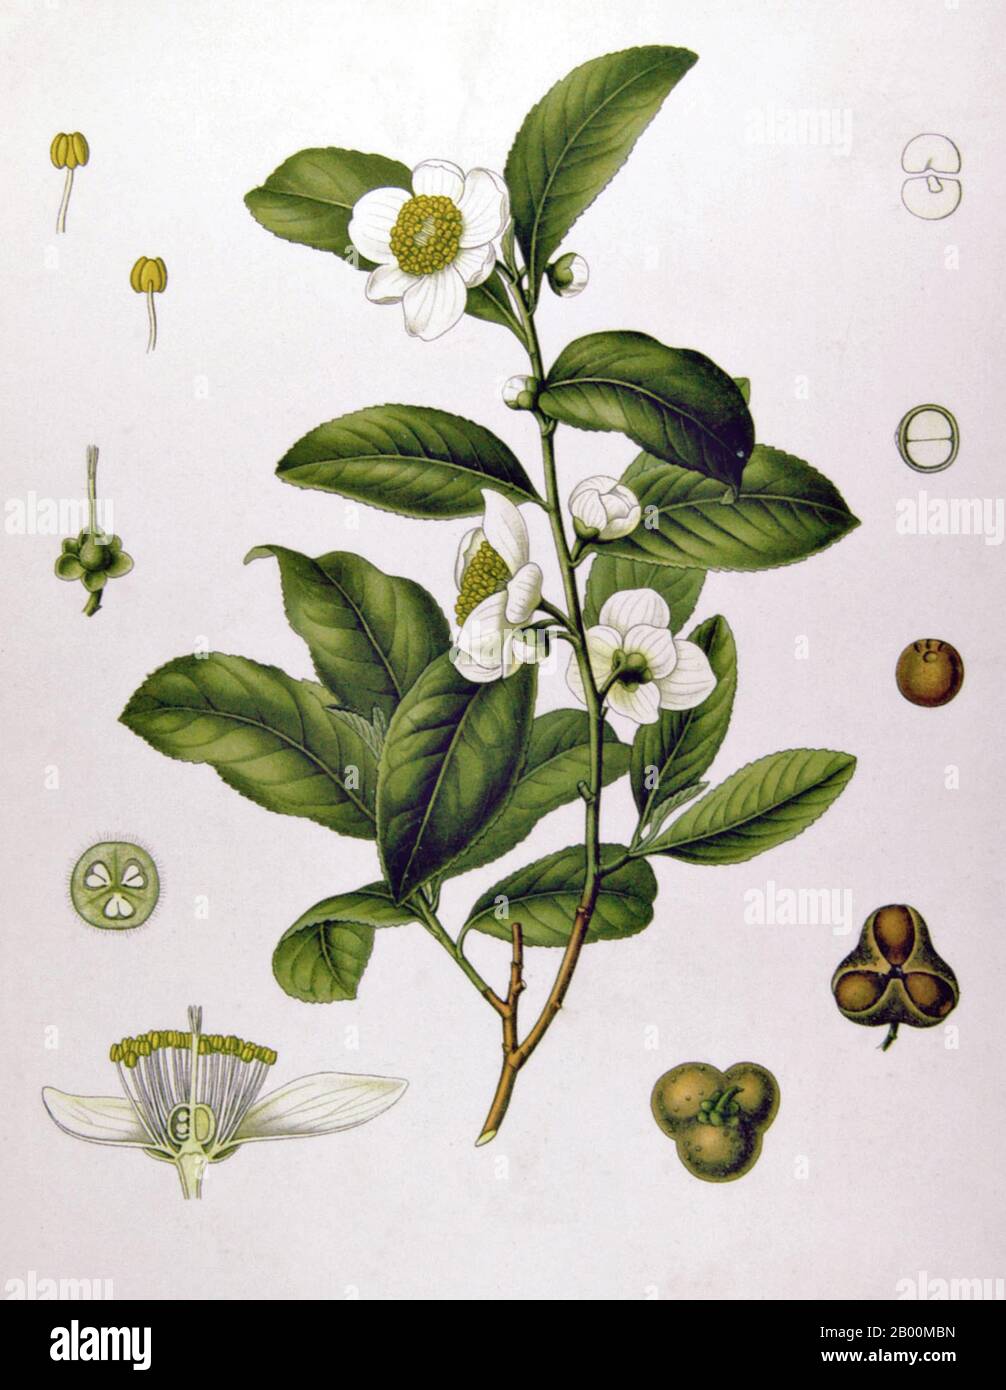 World: Camellia sinensis (Tea) from Köhler's Medizinal-Pflanzen (1887), lithograph by Walther Muller (1845-1927).  According to oral tradition, tea has been grown in China for more than four millennia. The earliest written accounts of tea making, however, date from around 350 CE, when it first became a drink at the imperial court. Stock Photo